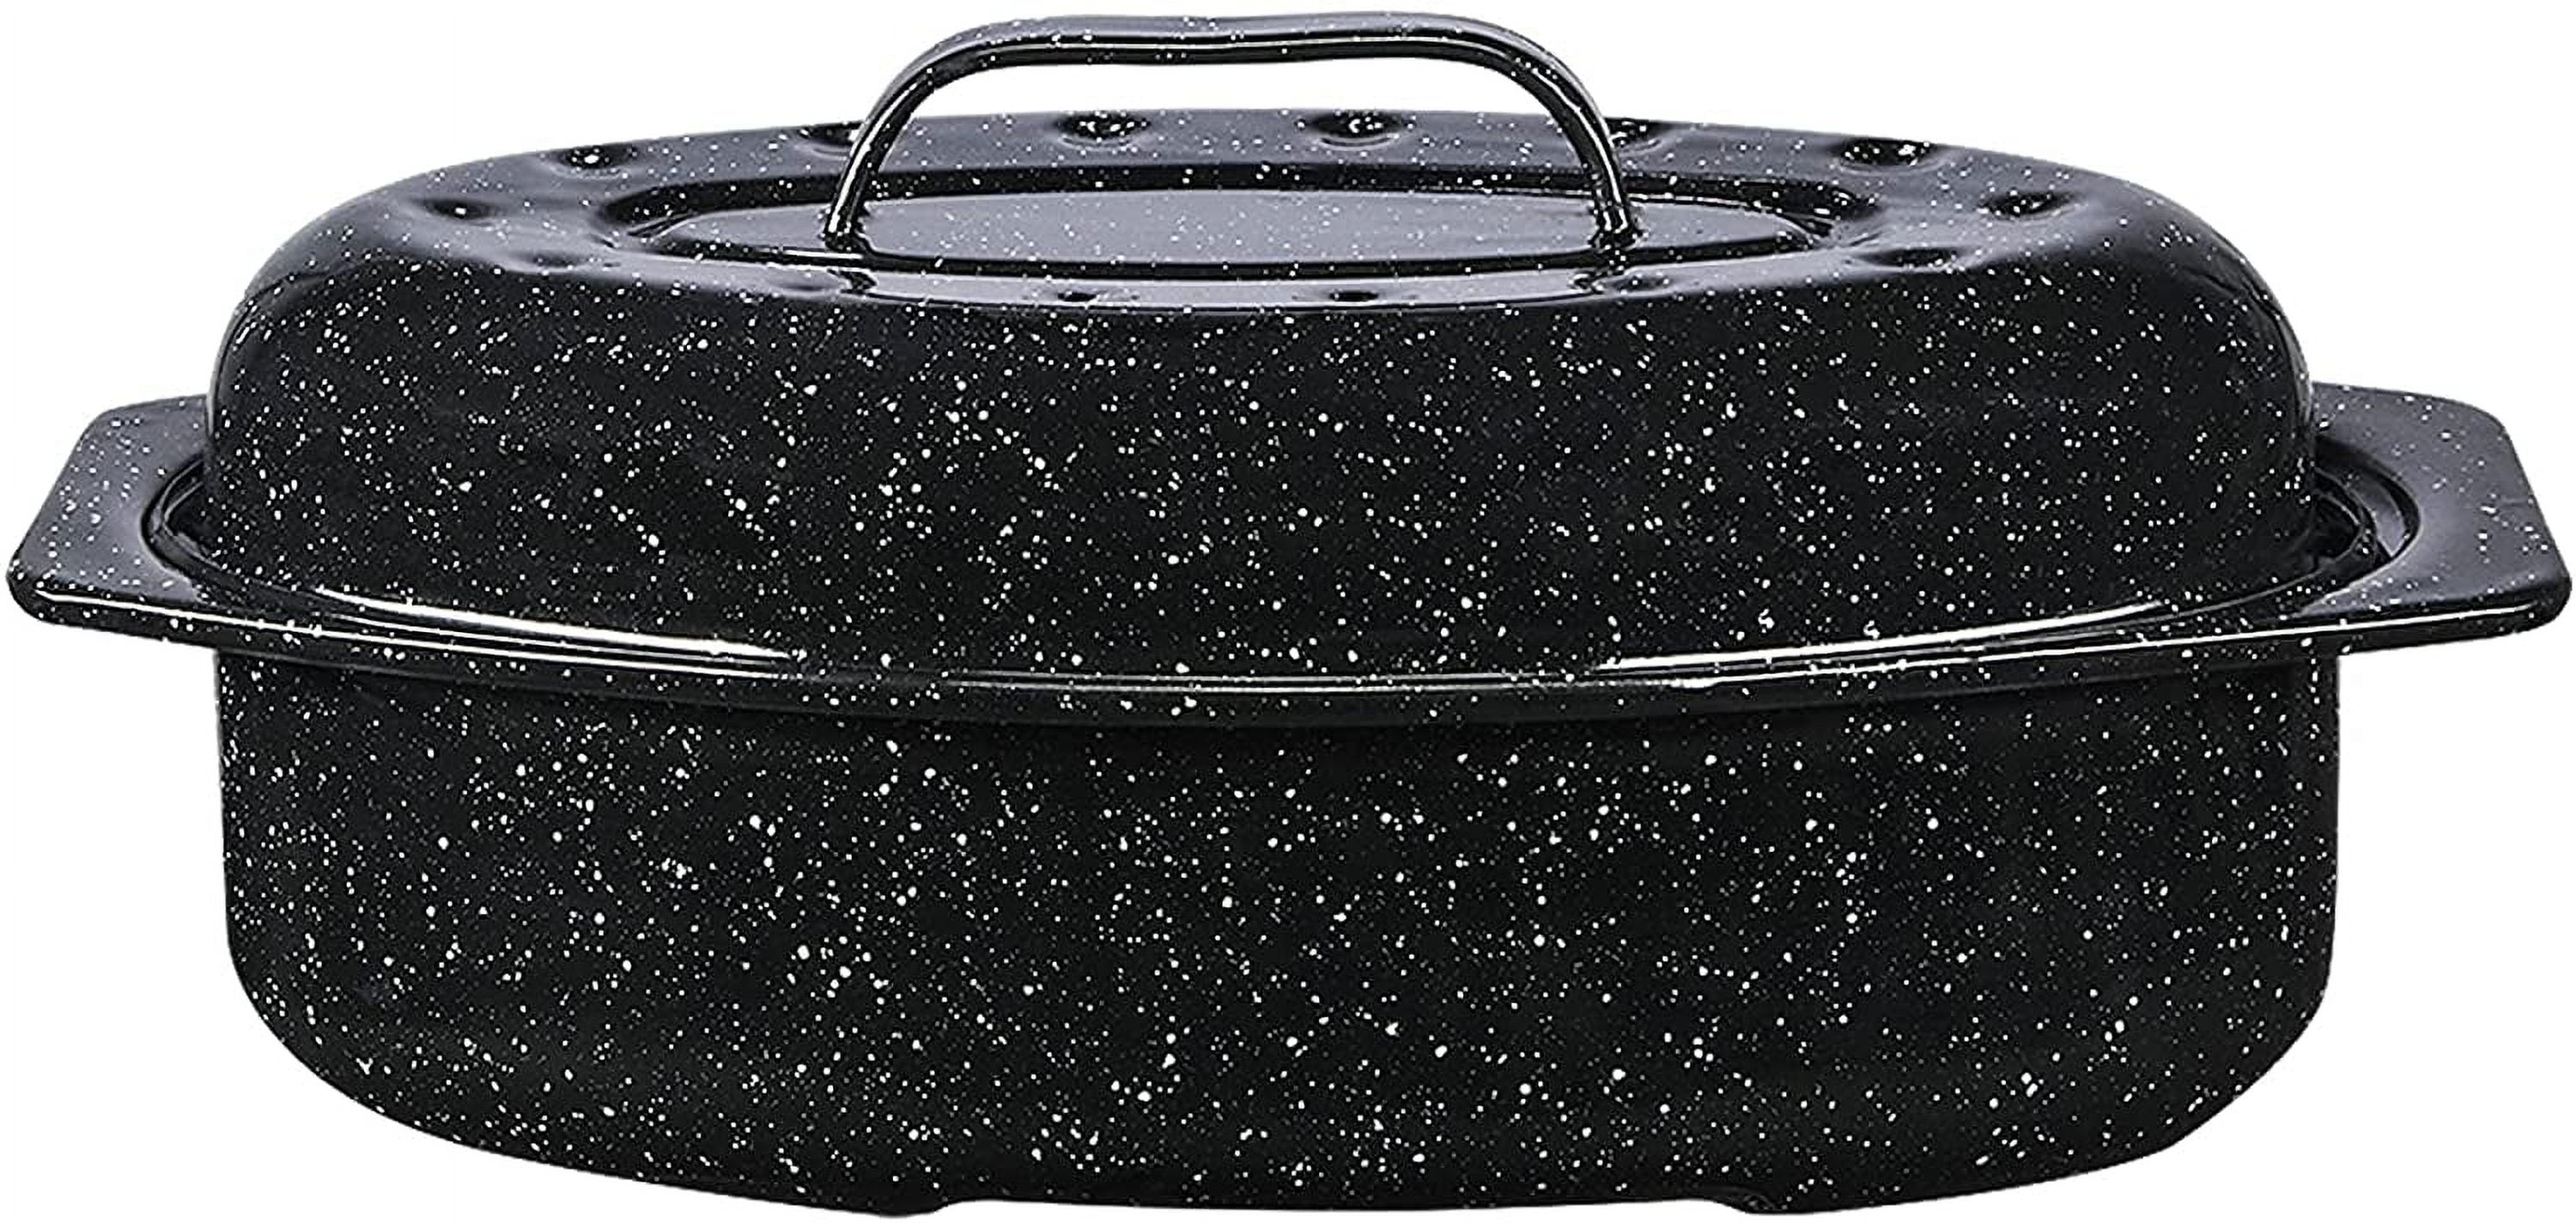 6-Quart Enameled Coated Oval Roaster with Stainless Steel Lid – Saveur  Selects